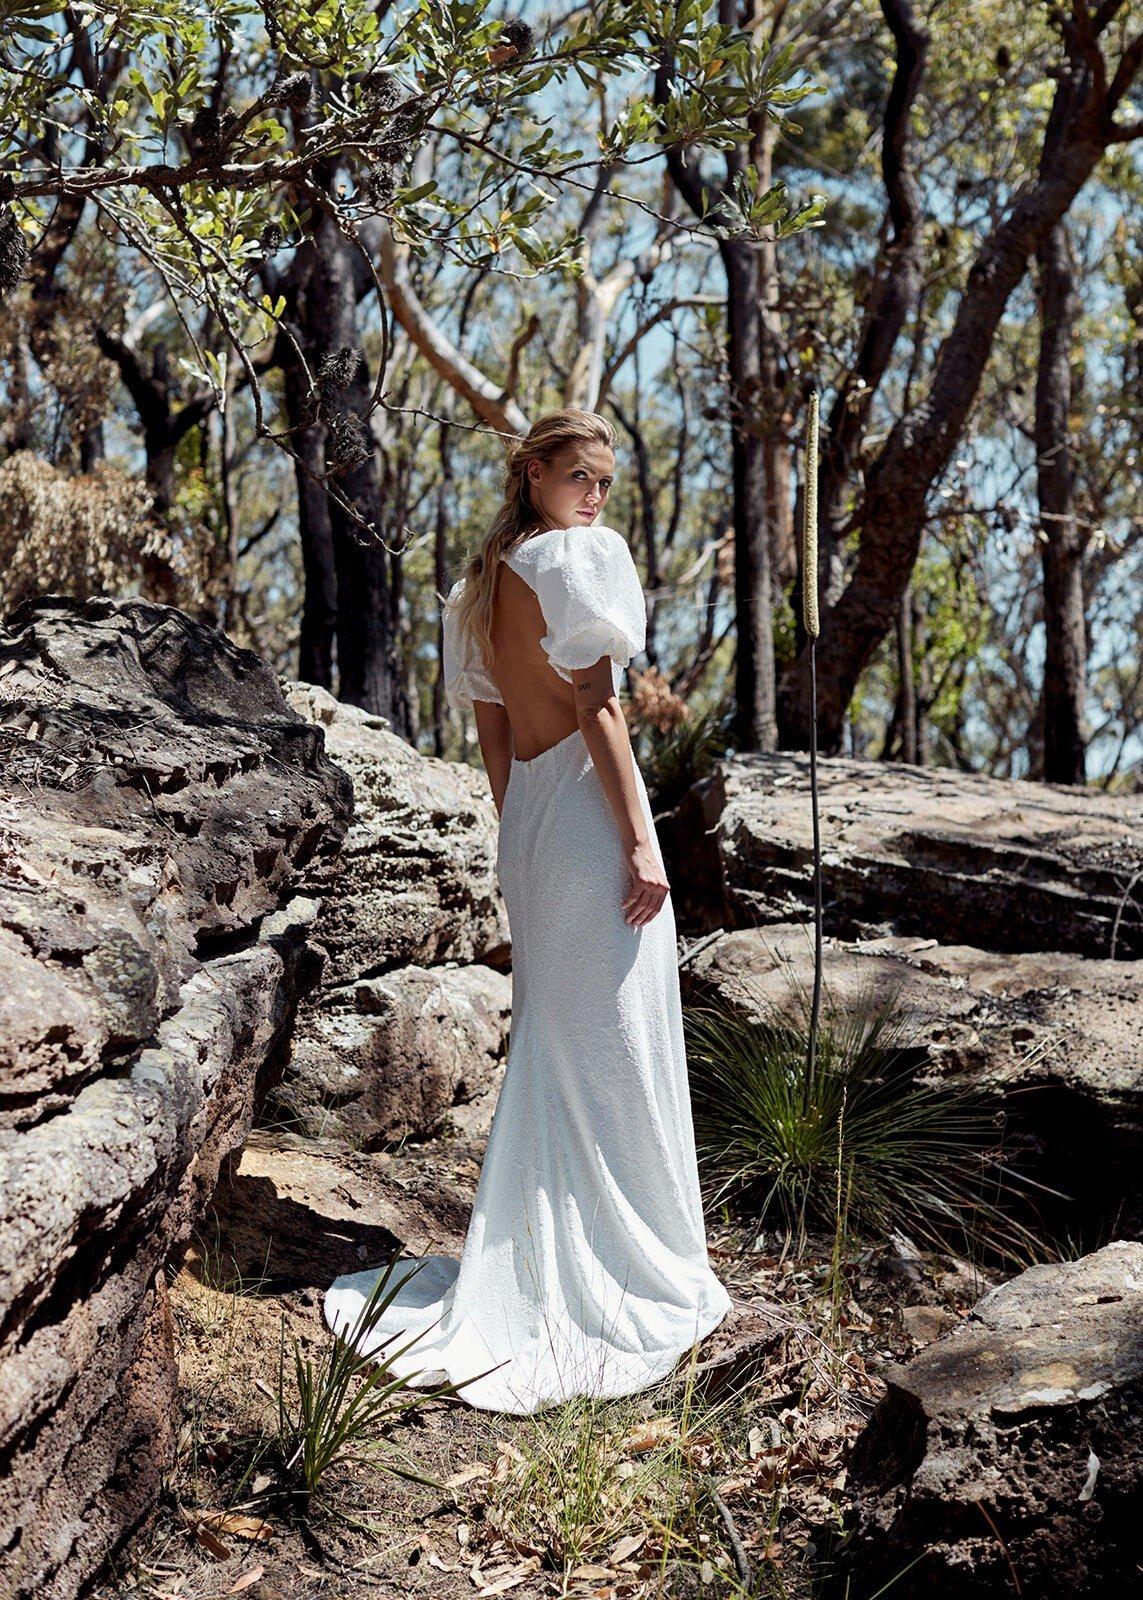 The 21 Best Square Neckline Wedding Dresses for an Elevated